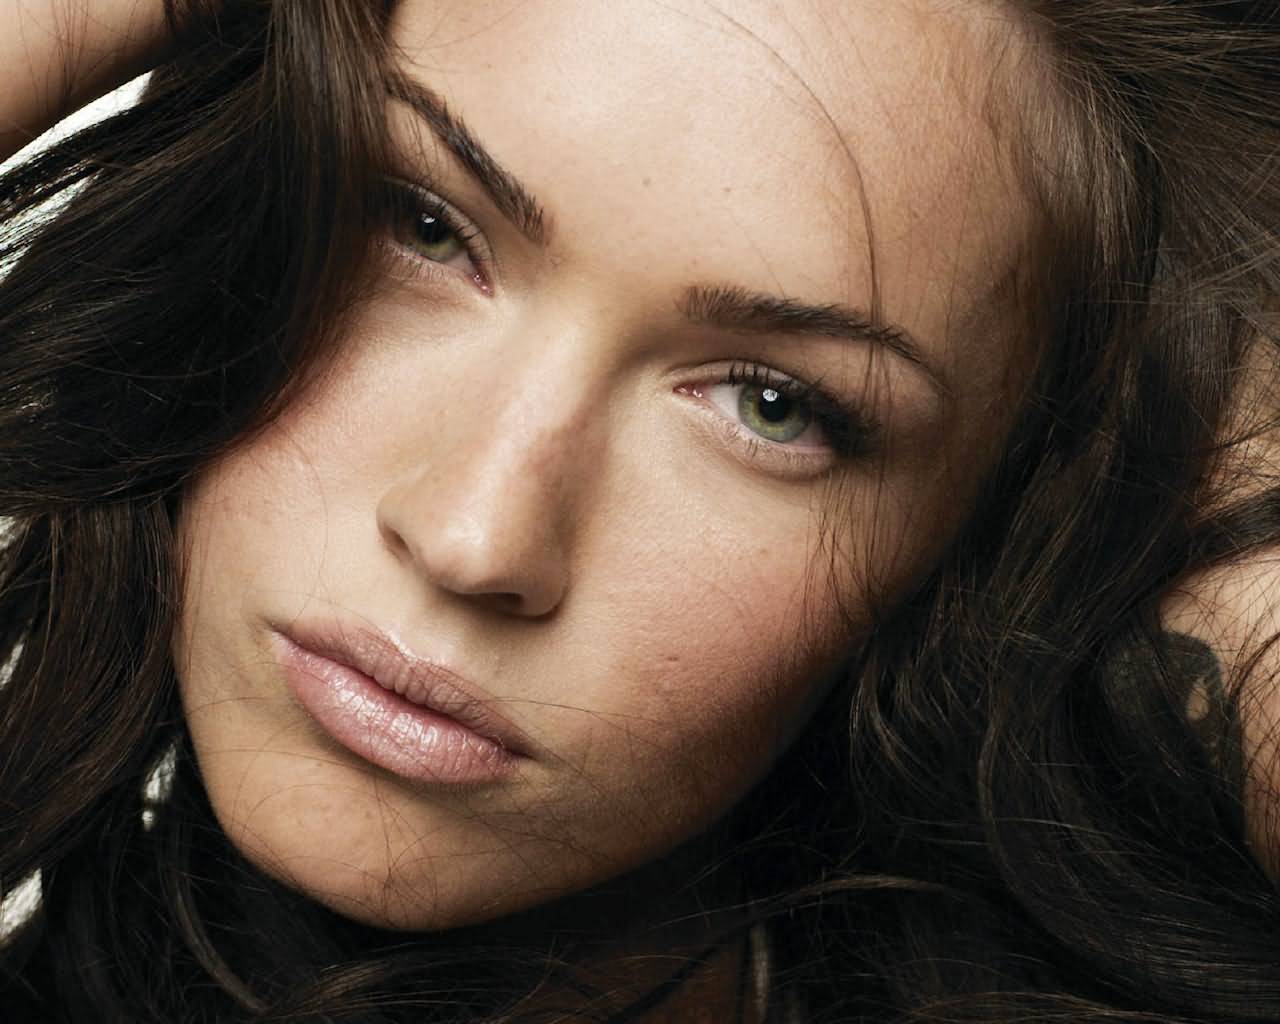 Join Megan Fox Club on iGossip and get latest news, updates and meet other members: http://t.co/7BJJaqsJrN